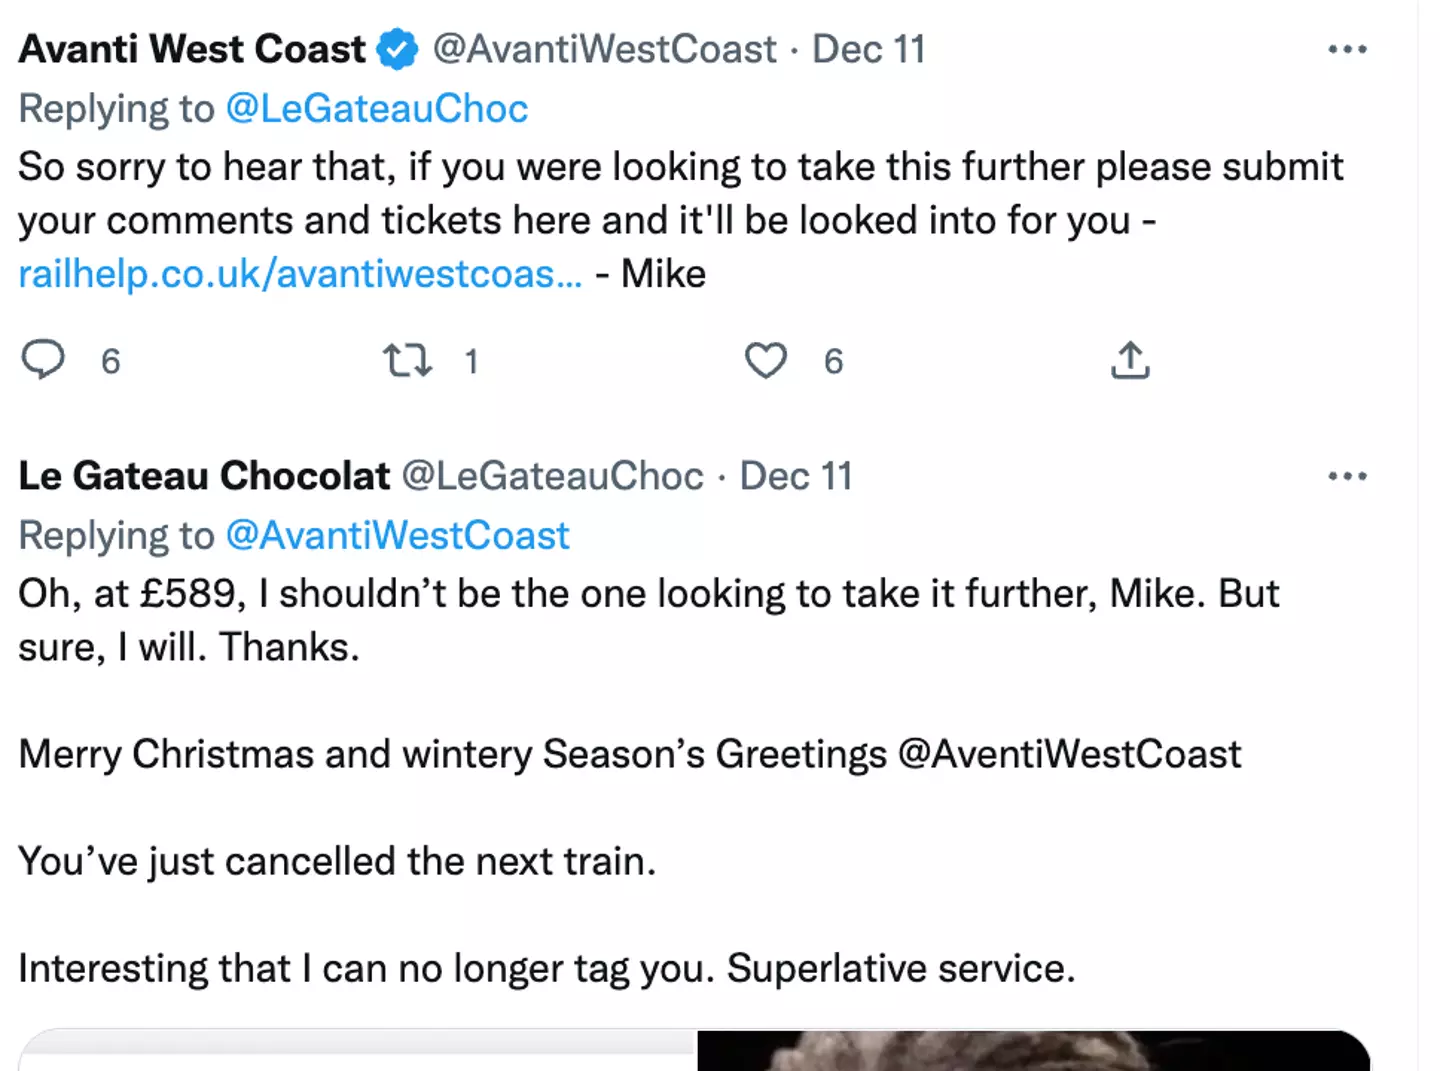 Avanti has apologised for the delays.